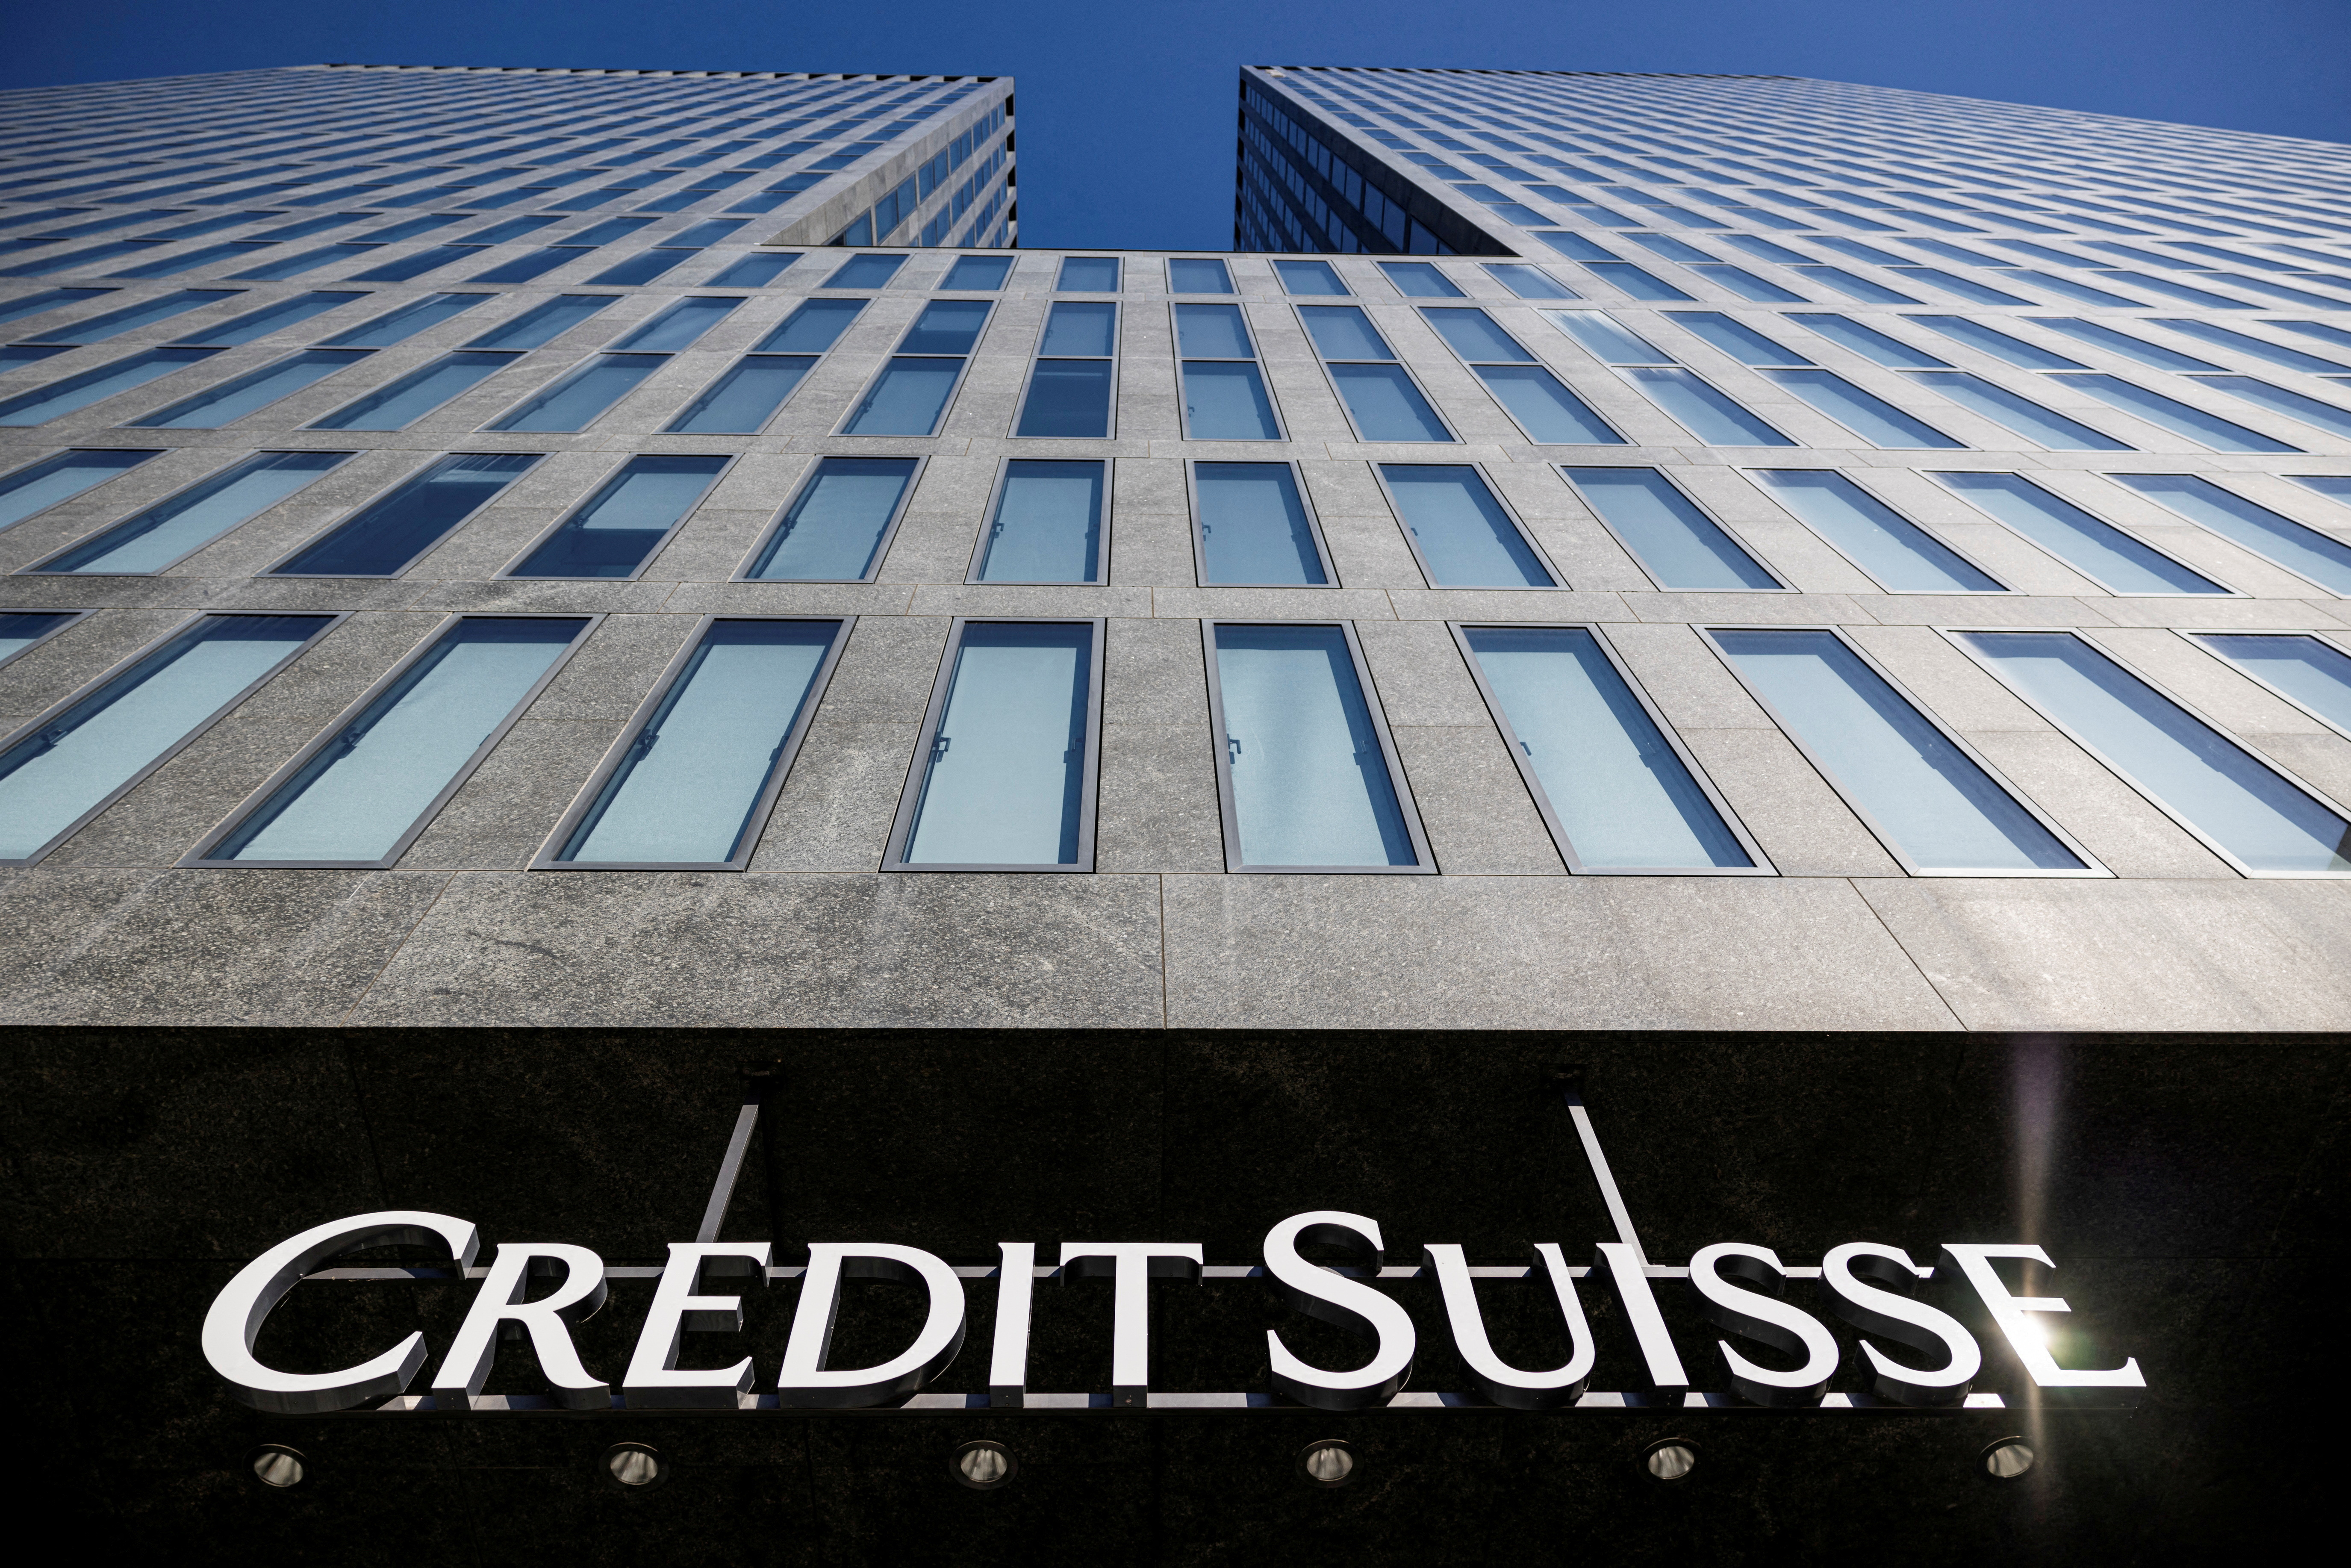 The logo of Credit Suisse is pictured on a building in Zurich